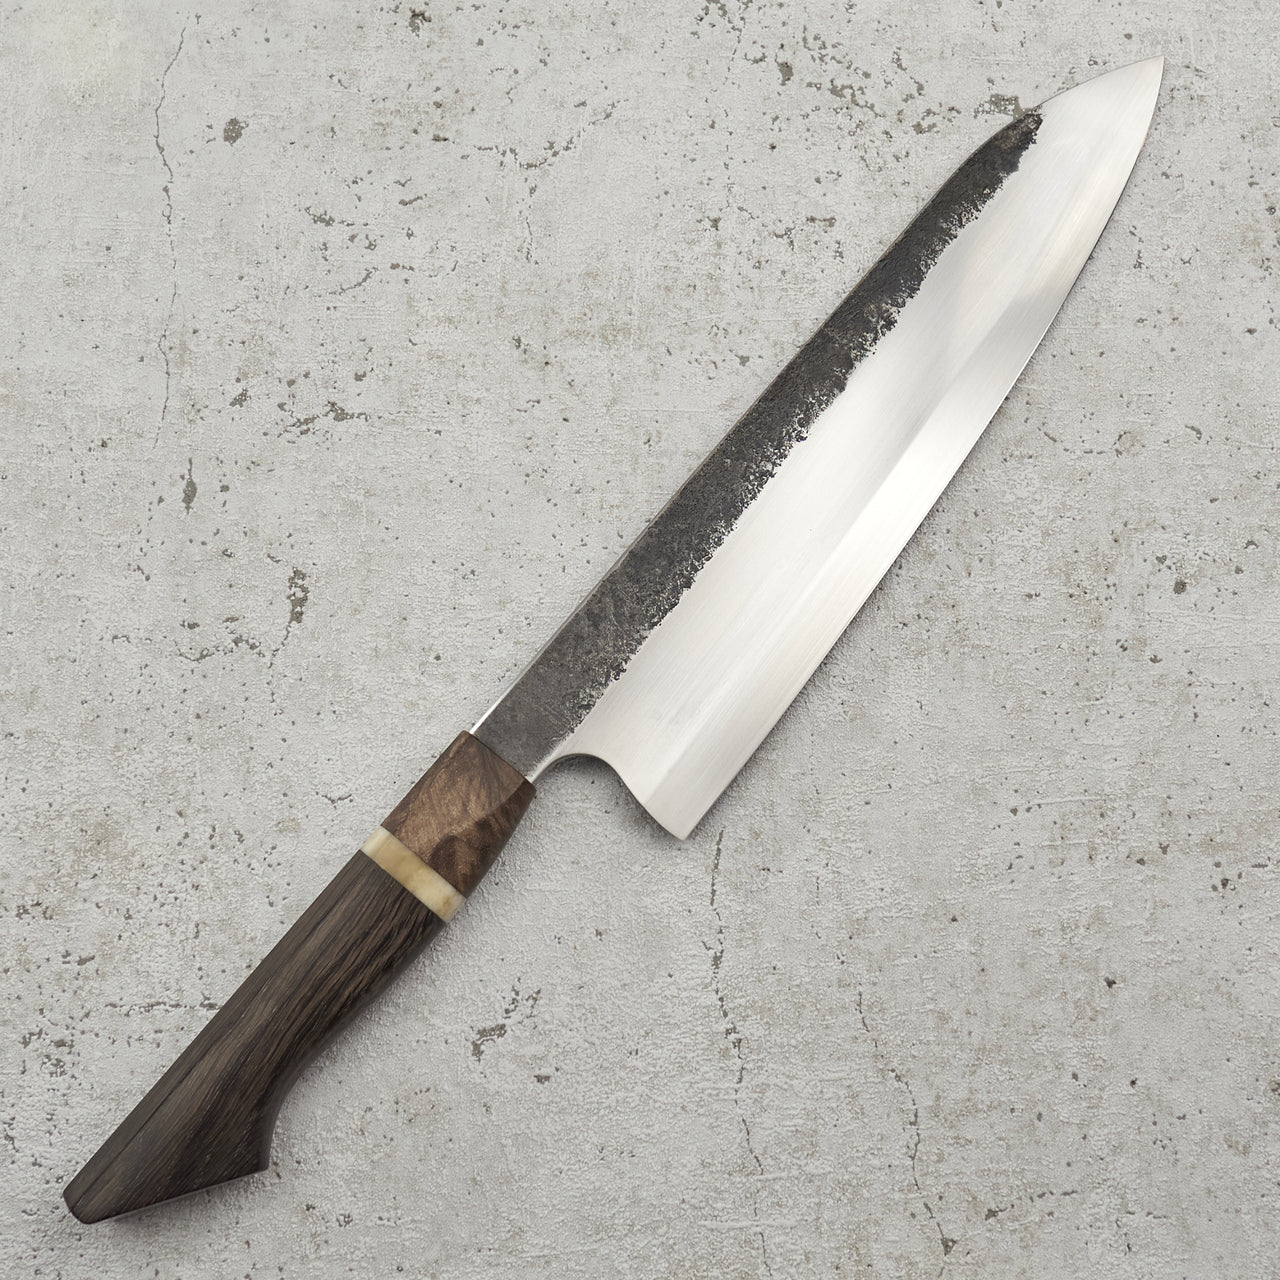 Lew Griffin Gyuto 240mm 52100 Carbon Steel - S Grind - Blade